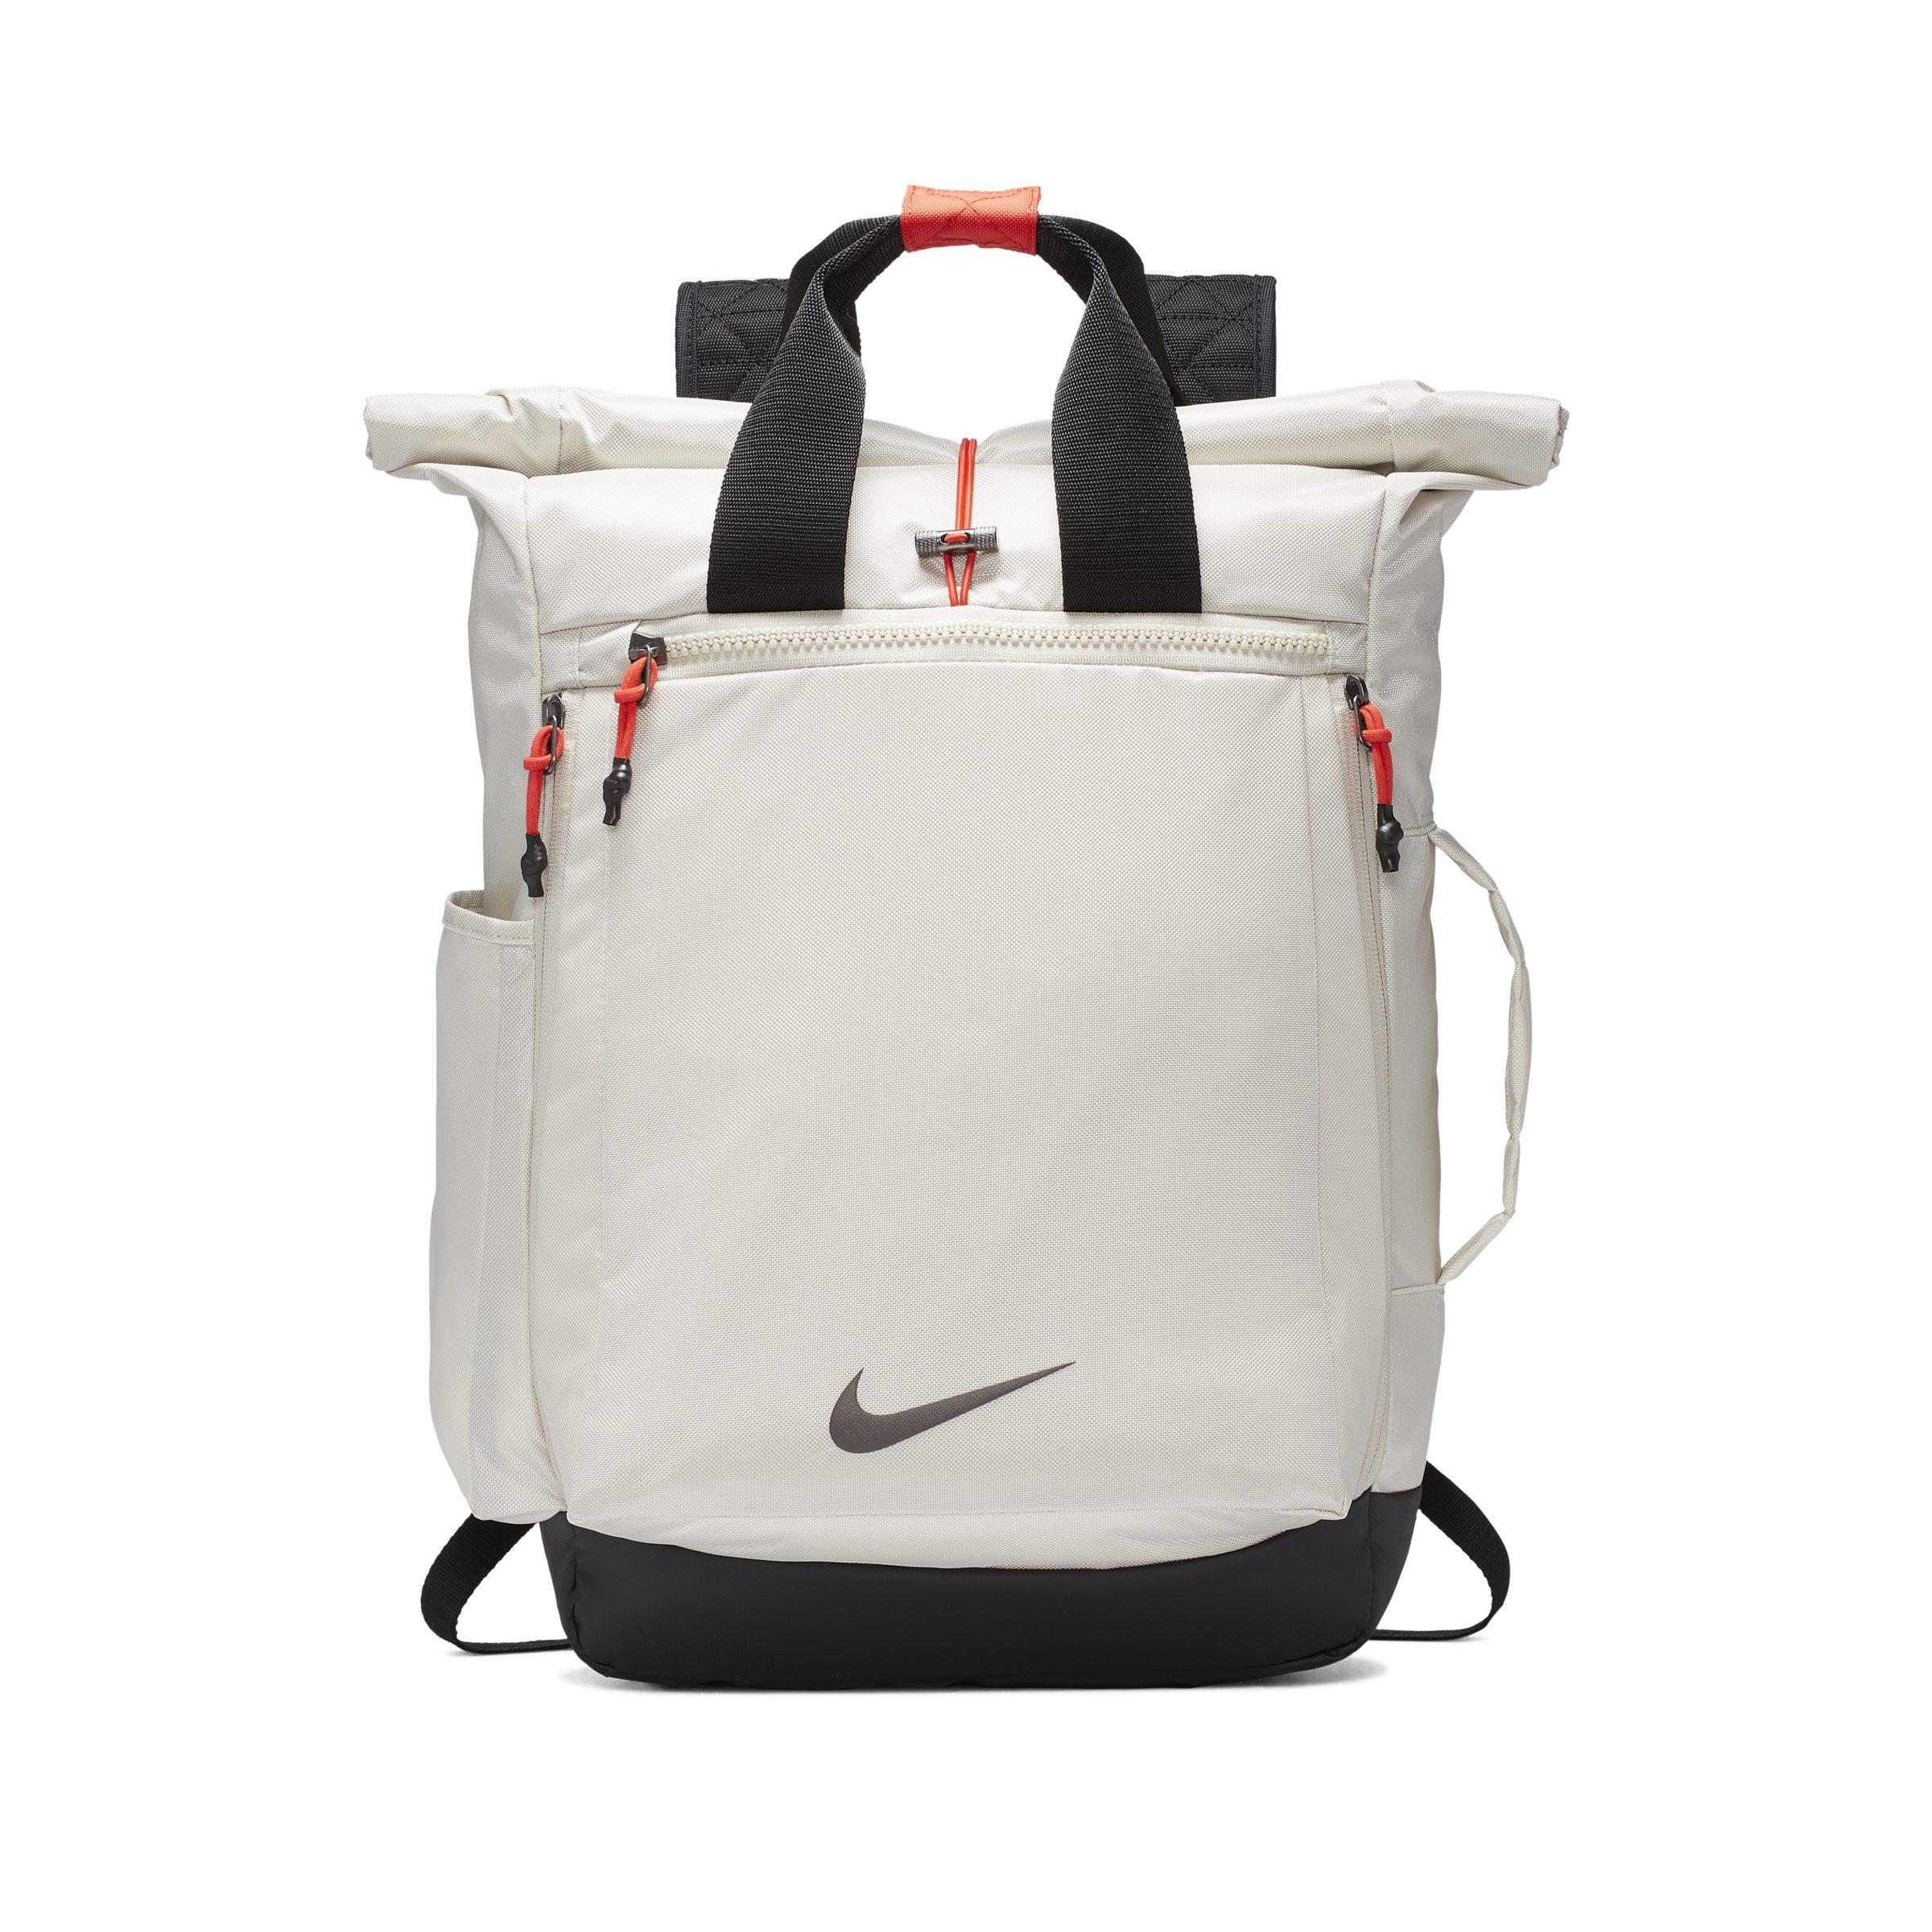 Disguised experience browser sac nike vapor energy 2 0 at least Mold Bee